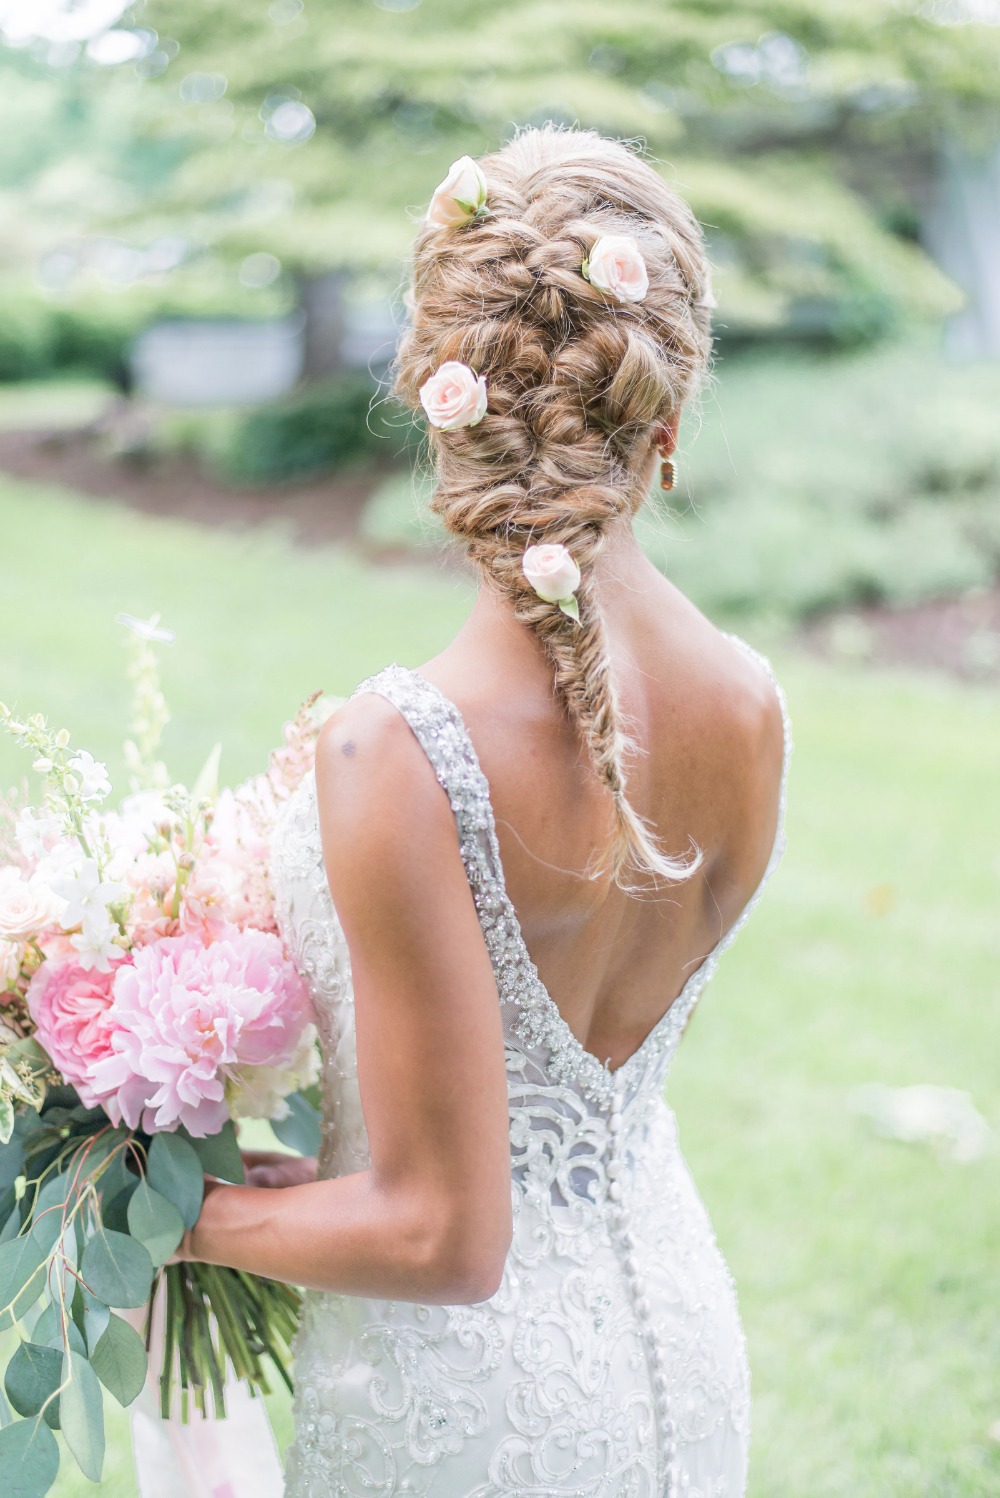 Gorgeous bridal hair with flowers